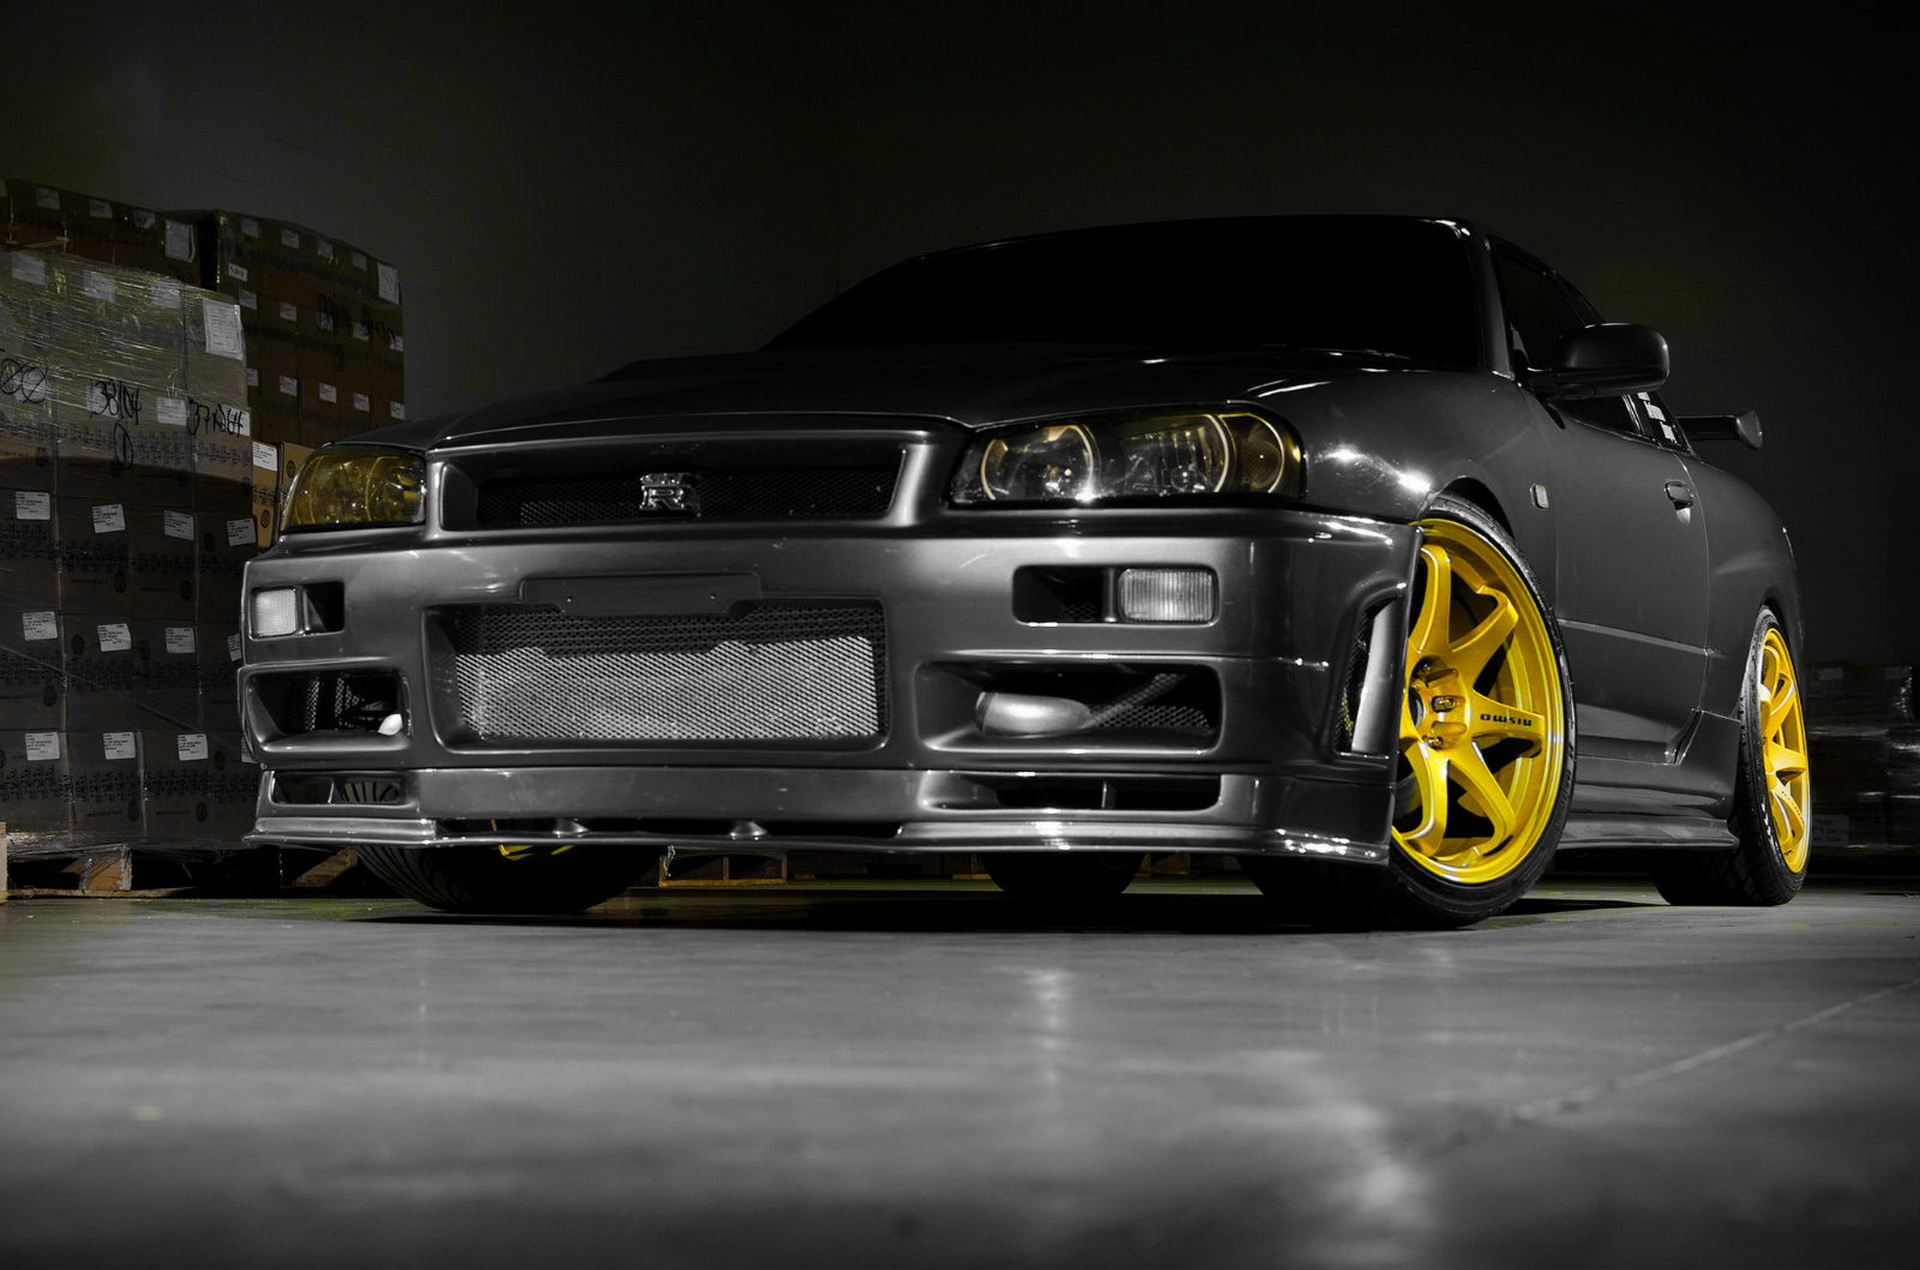 60+ Nissan Skyline HD Wallpapers and Backgrounds